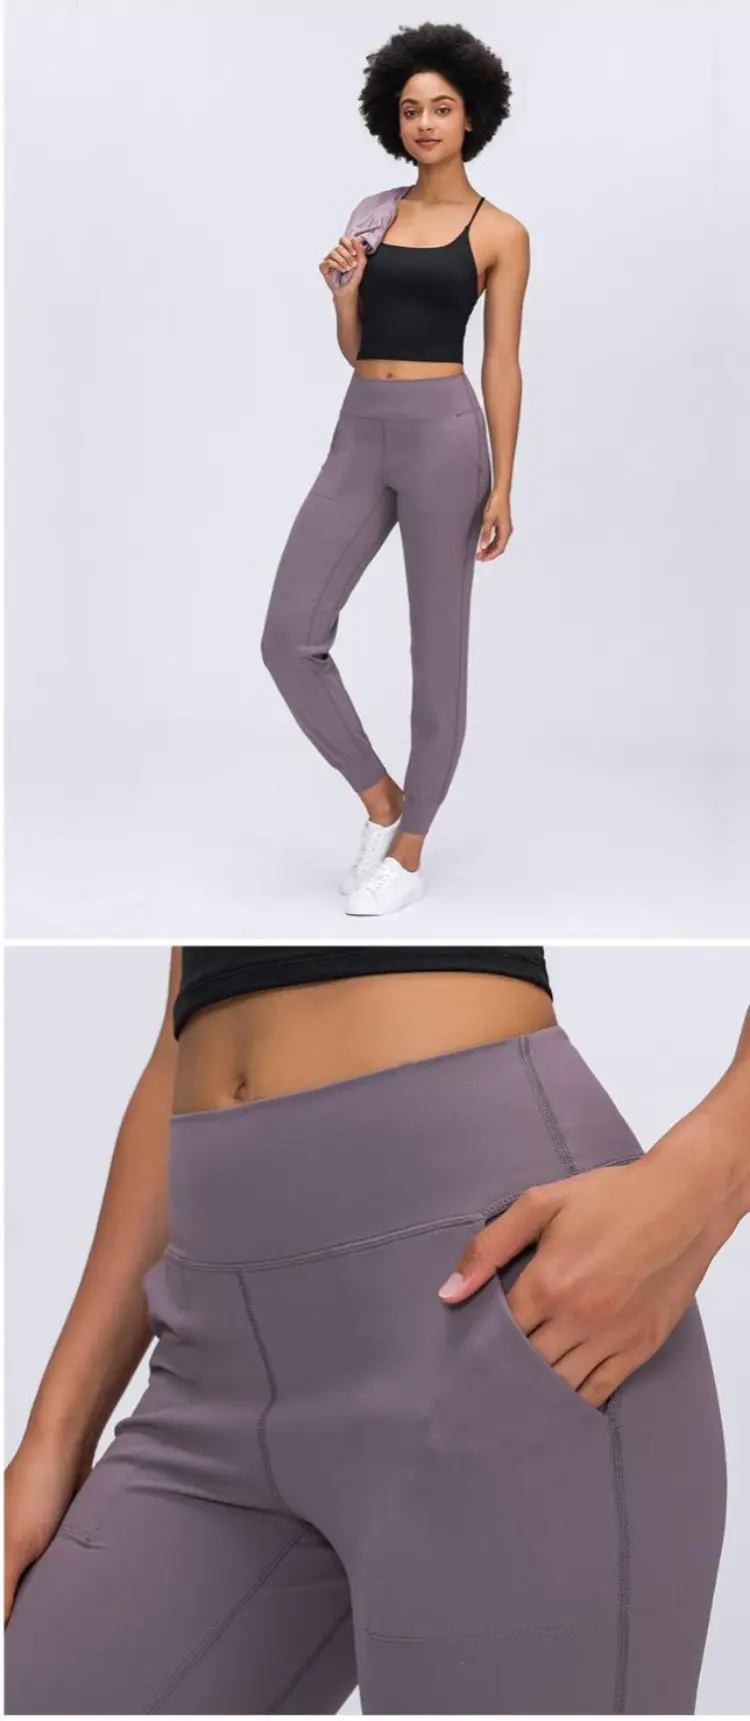 Lululemon Loose Comfortable Straight Workout Yoga Running Pants Quick Drying Exercise Jogger Fitness Cropped Yogapants